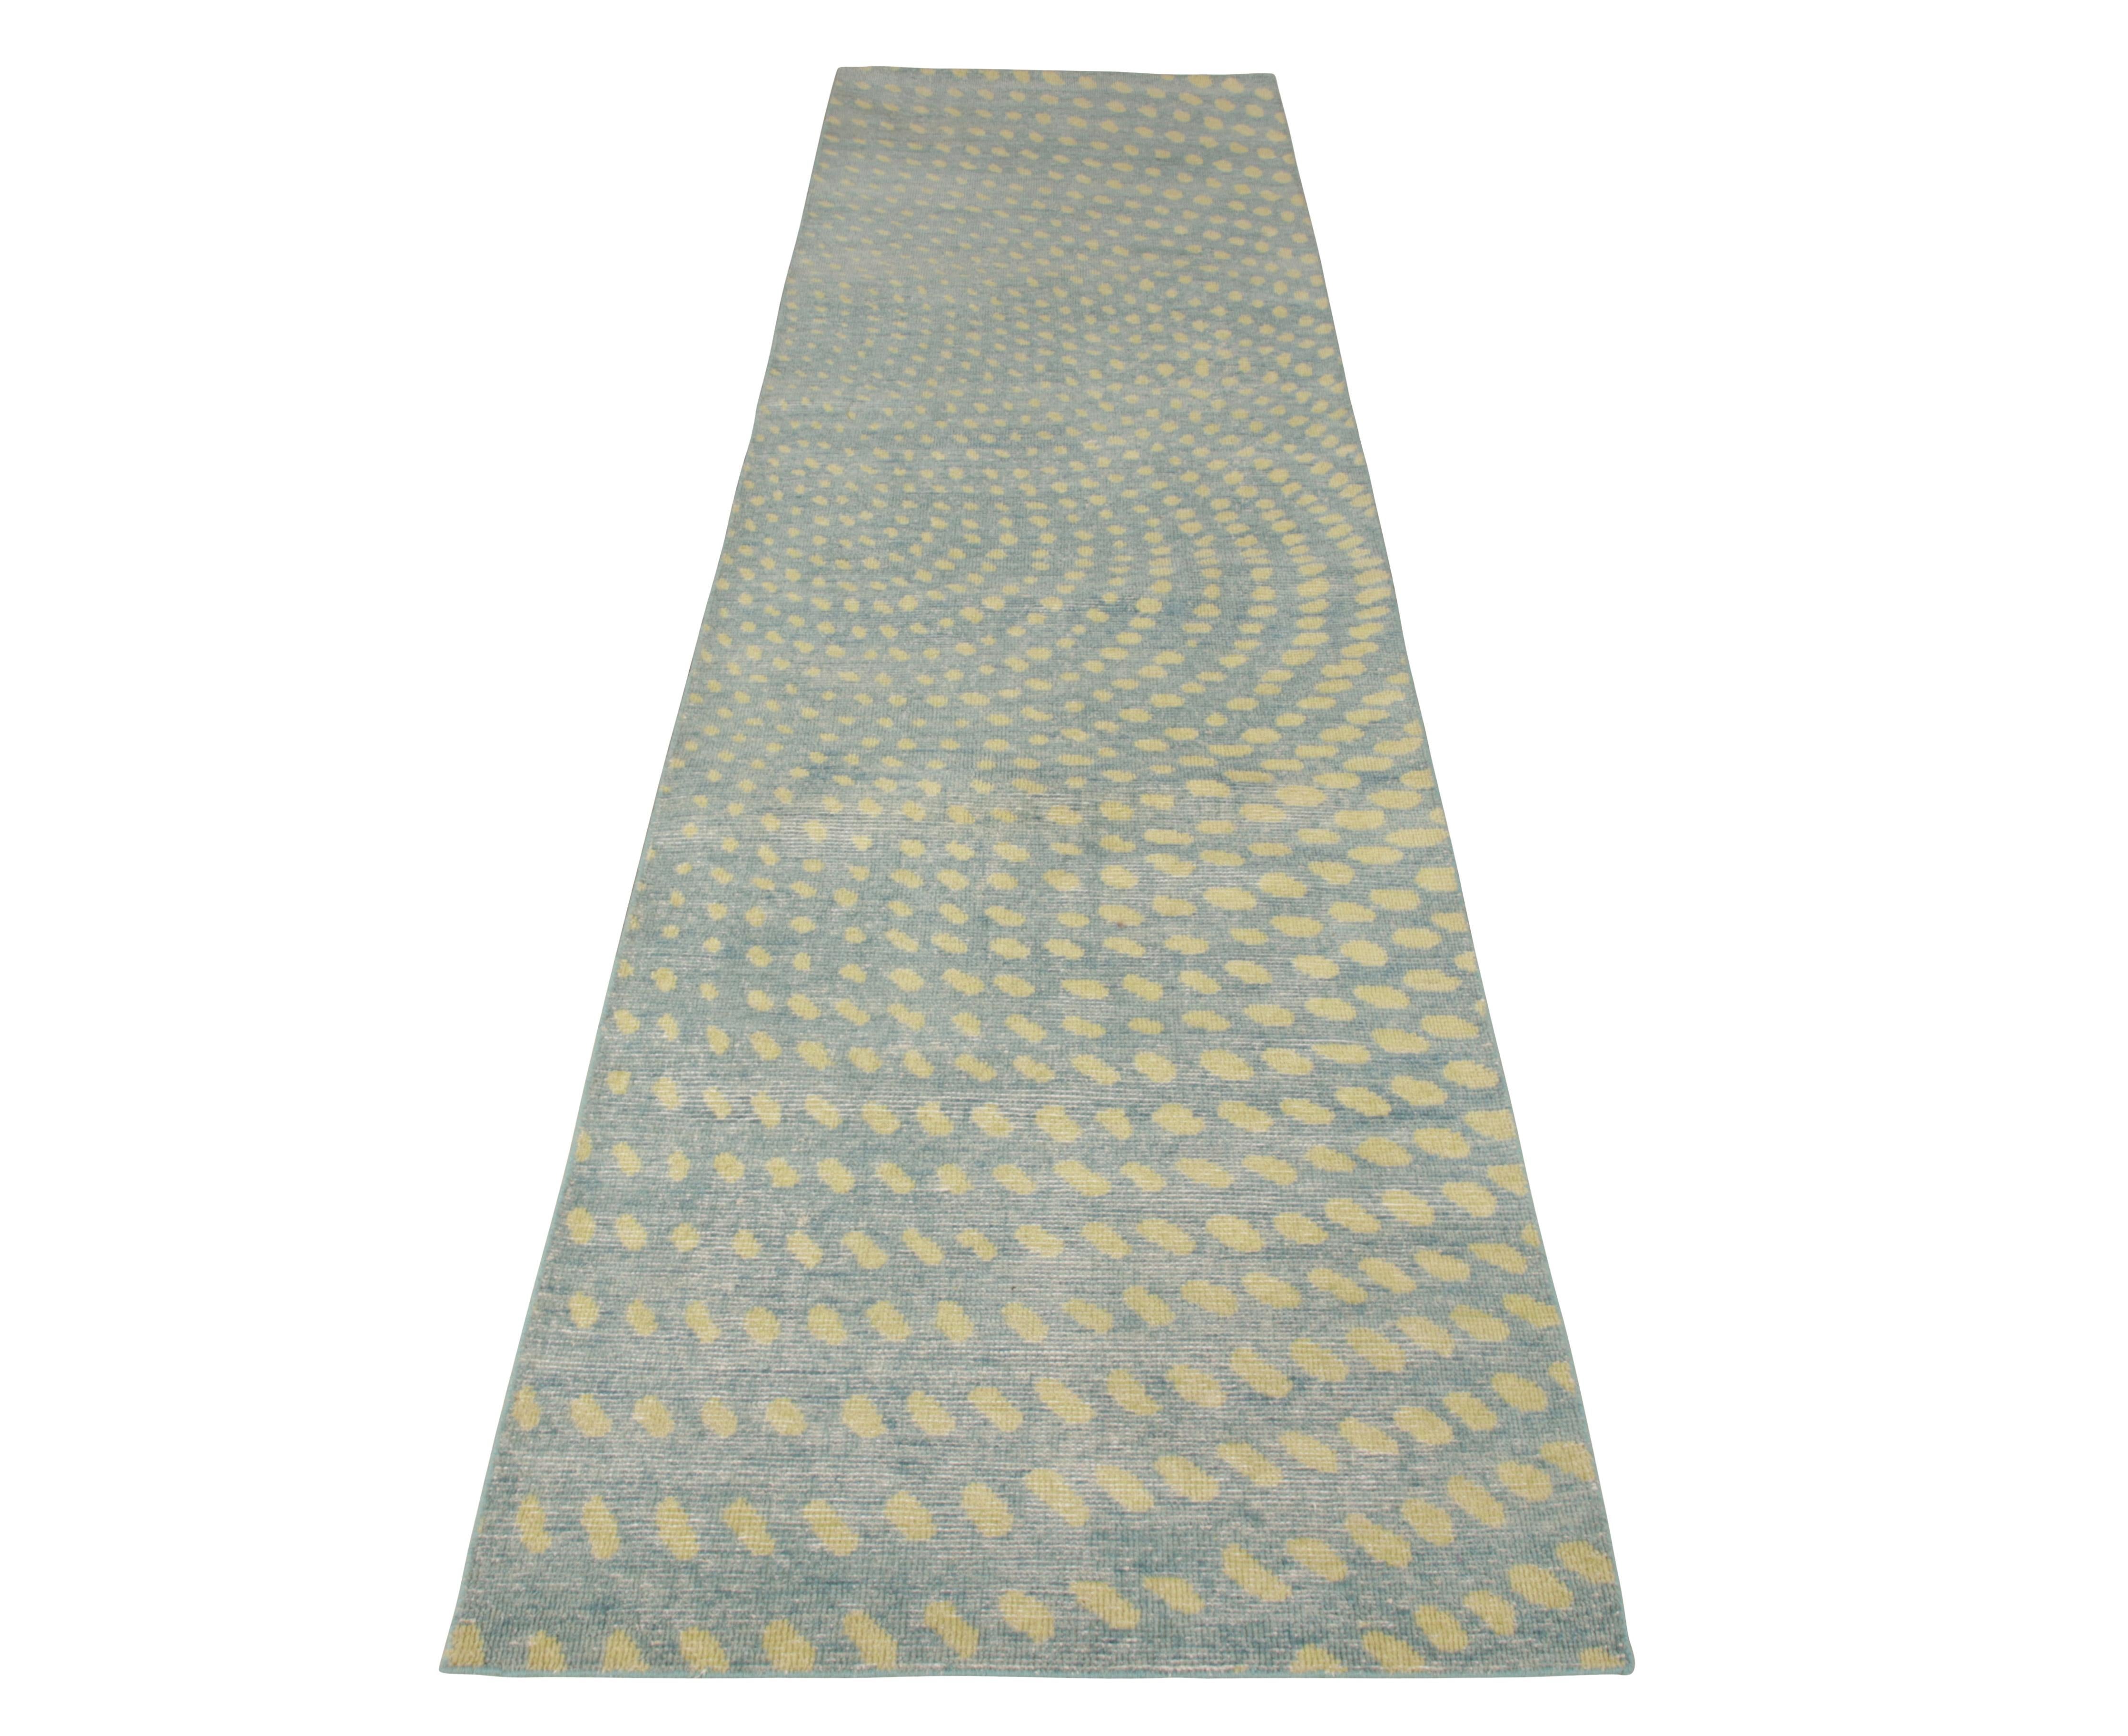 Hand knotted in wool, a welcoming 3 x 12 runner available in Rug & Kilim’s Homage collection. This piece emanates a bright summer vibe with yellow dots playfully dancing on a pervasive blue background scattering across the length of the weave. The